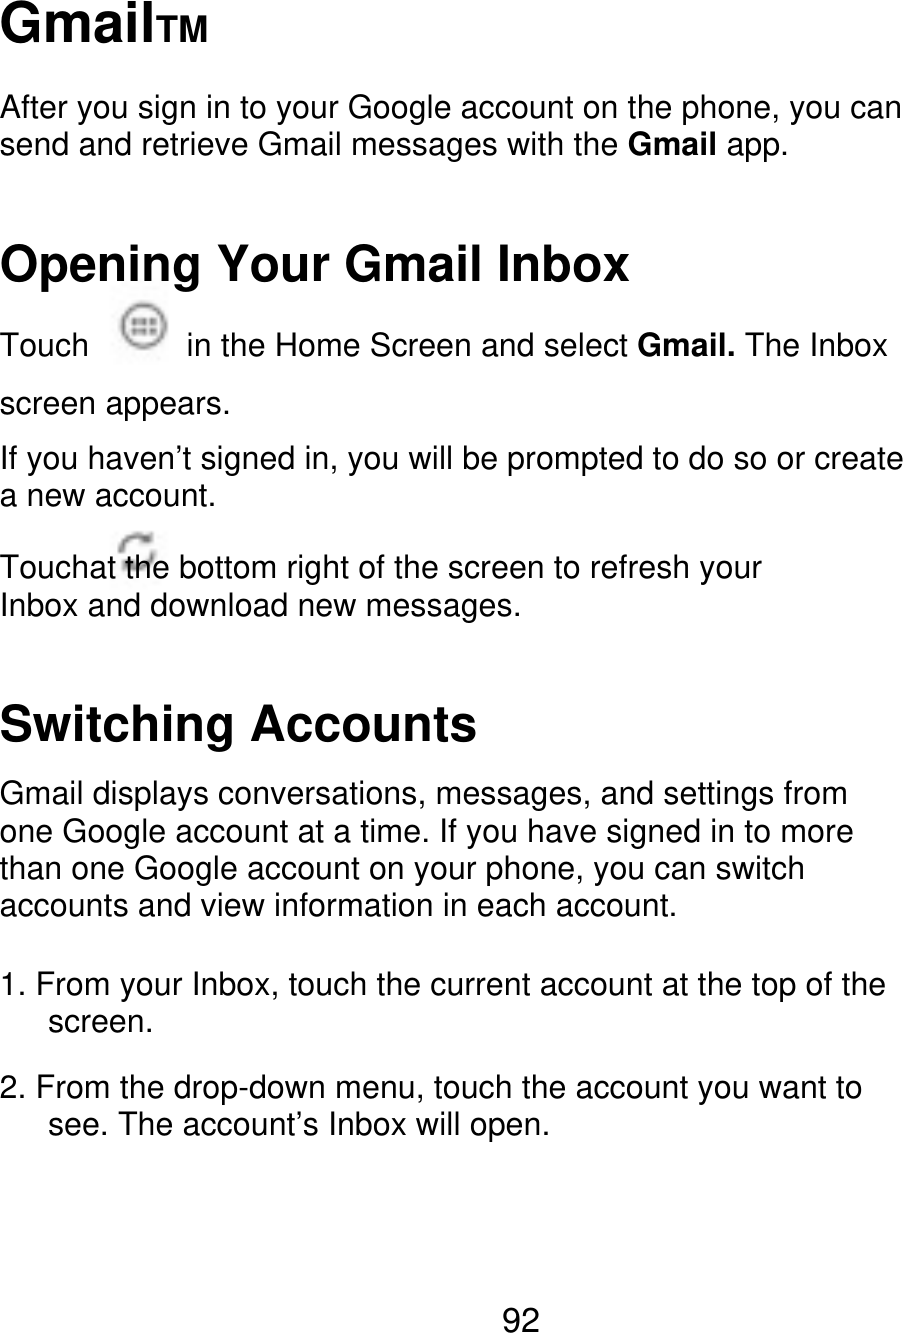 GmailTM After you sign in to your Google account on the phone, you can send and retrieve Gmail messages with the Gmail app. Opening Your Gmail Inbox Touch in the Home Screen and select Gmail. The Inbox screen appears. If you haven’t signed in, you will be prompted to do so or create a new account. Touchat the bottom right of the screen to refresh your Inbox and download new messages. Switching Accounts Gmail displays conversations, messages, and settings from one Google account at a time. If you have signed in to more than one Google account on your phone, you can switch accounts and view information in each account. 1. From your Inbox, touch the current account at the top of the    screen. 2. From the drop-down menu, touch the account you want to       see. The account’s Inbox will open. 92 